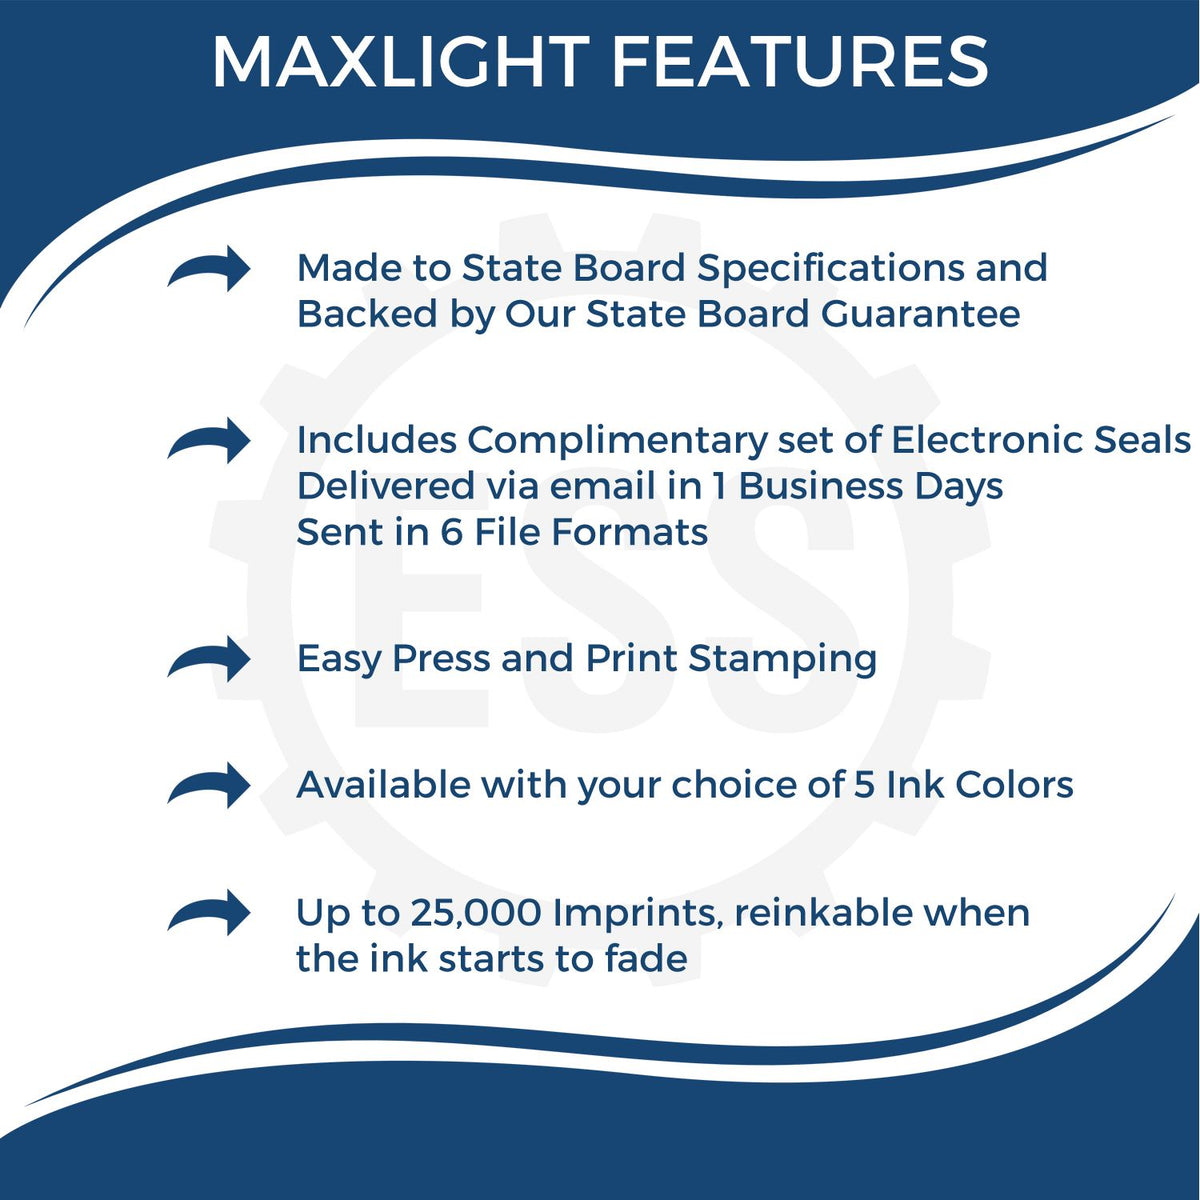 A picture of an infographic highlighting the selling points for the Premium MaxLight Pre-Inked Maryland Landscape Architects Stamp